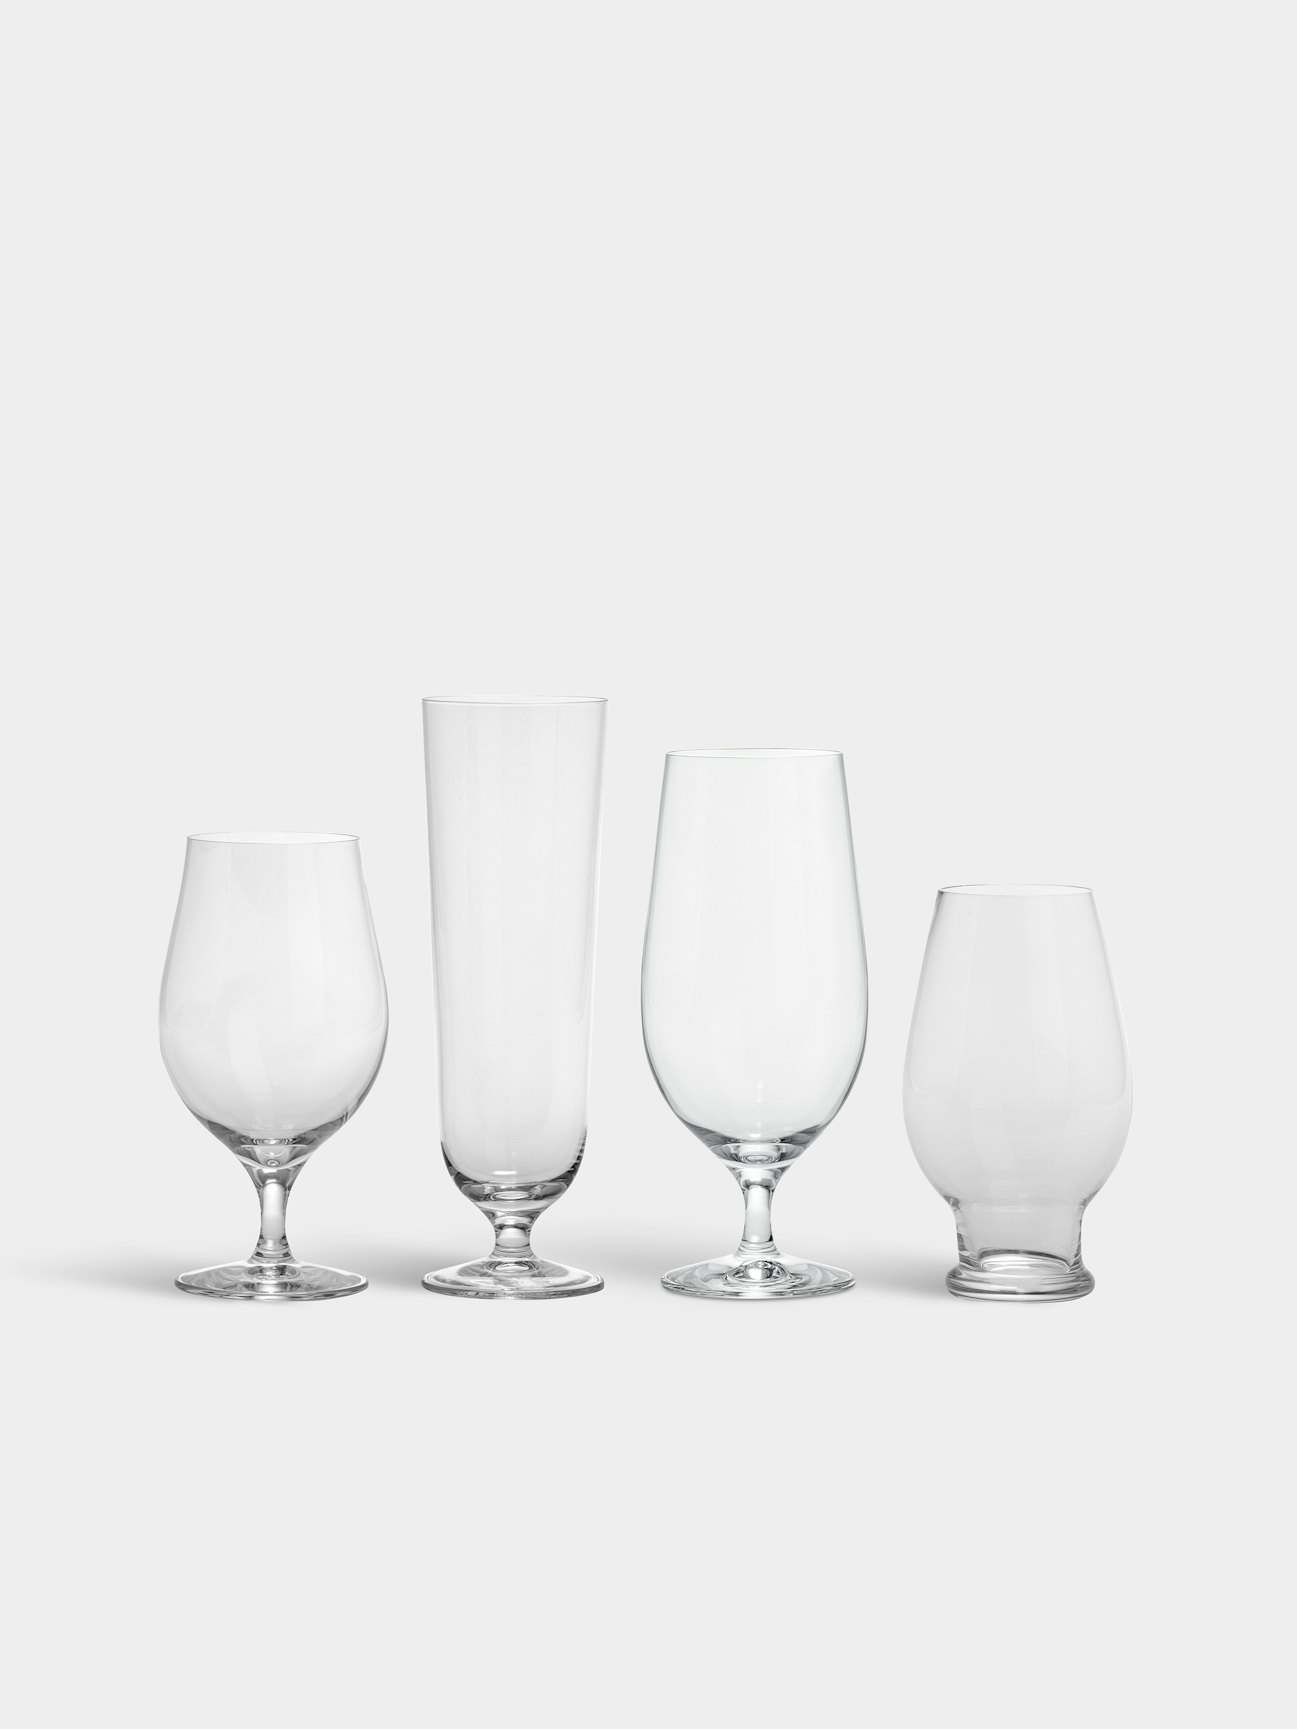 Beer tasting kit includes 4 different glass